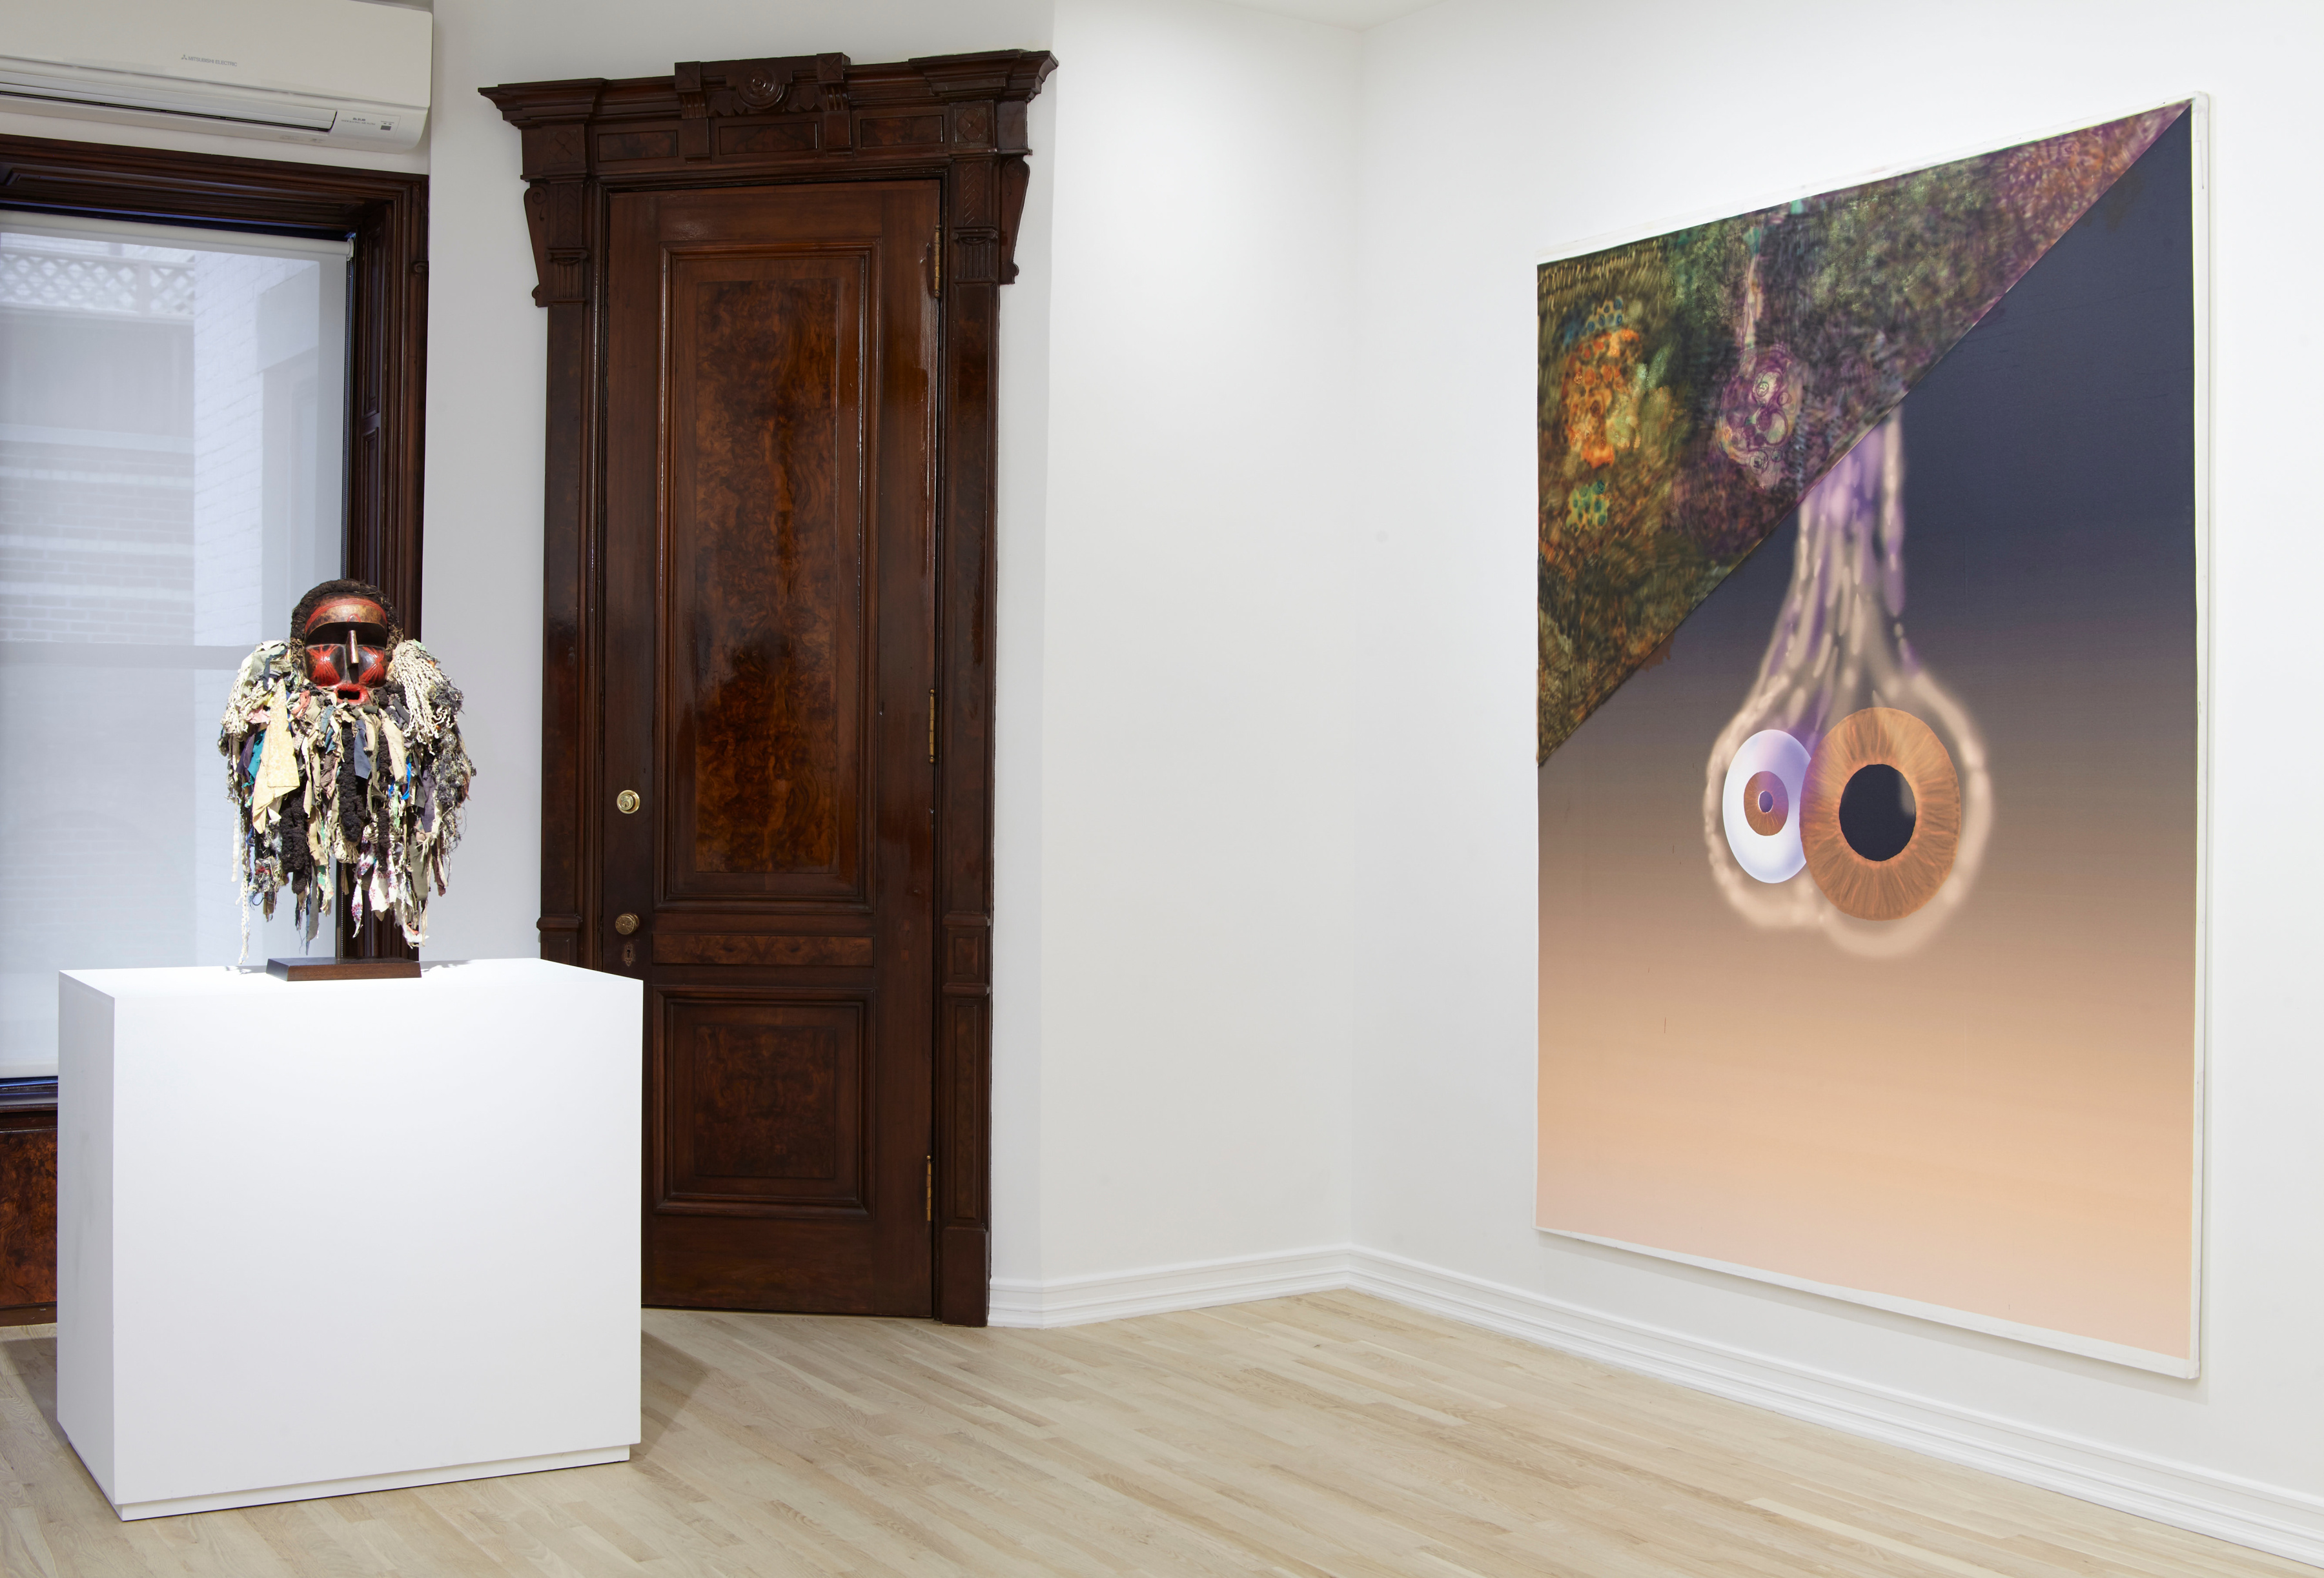 Installation view of&nbsp;Peahead,&nbsp; 2014. Courtesy Franklin Parrasch Gallery.